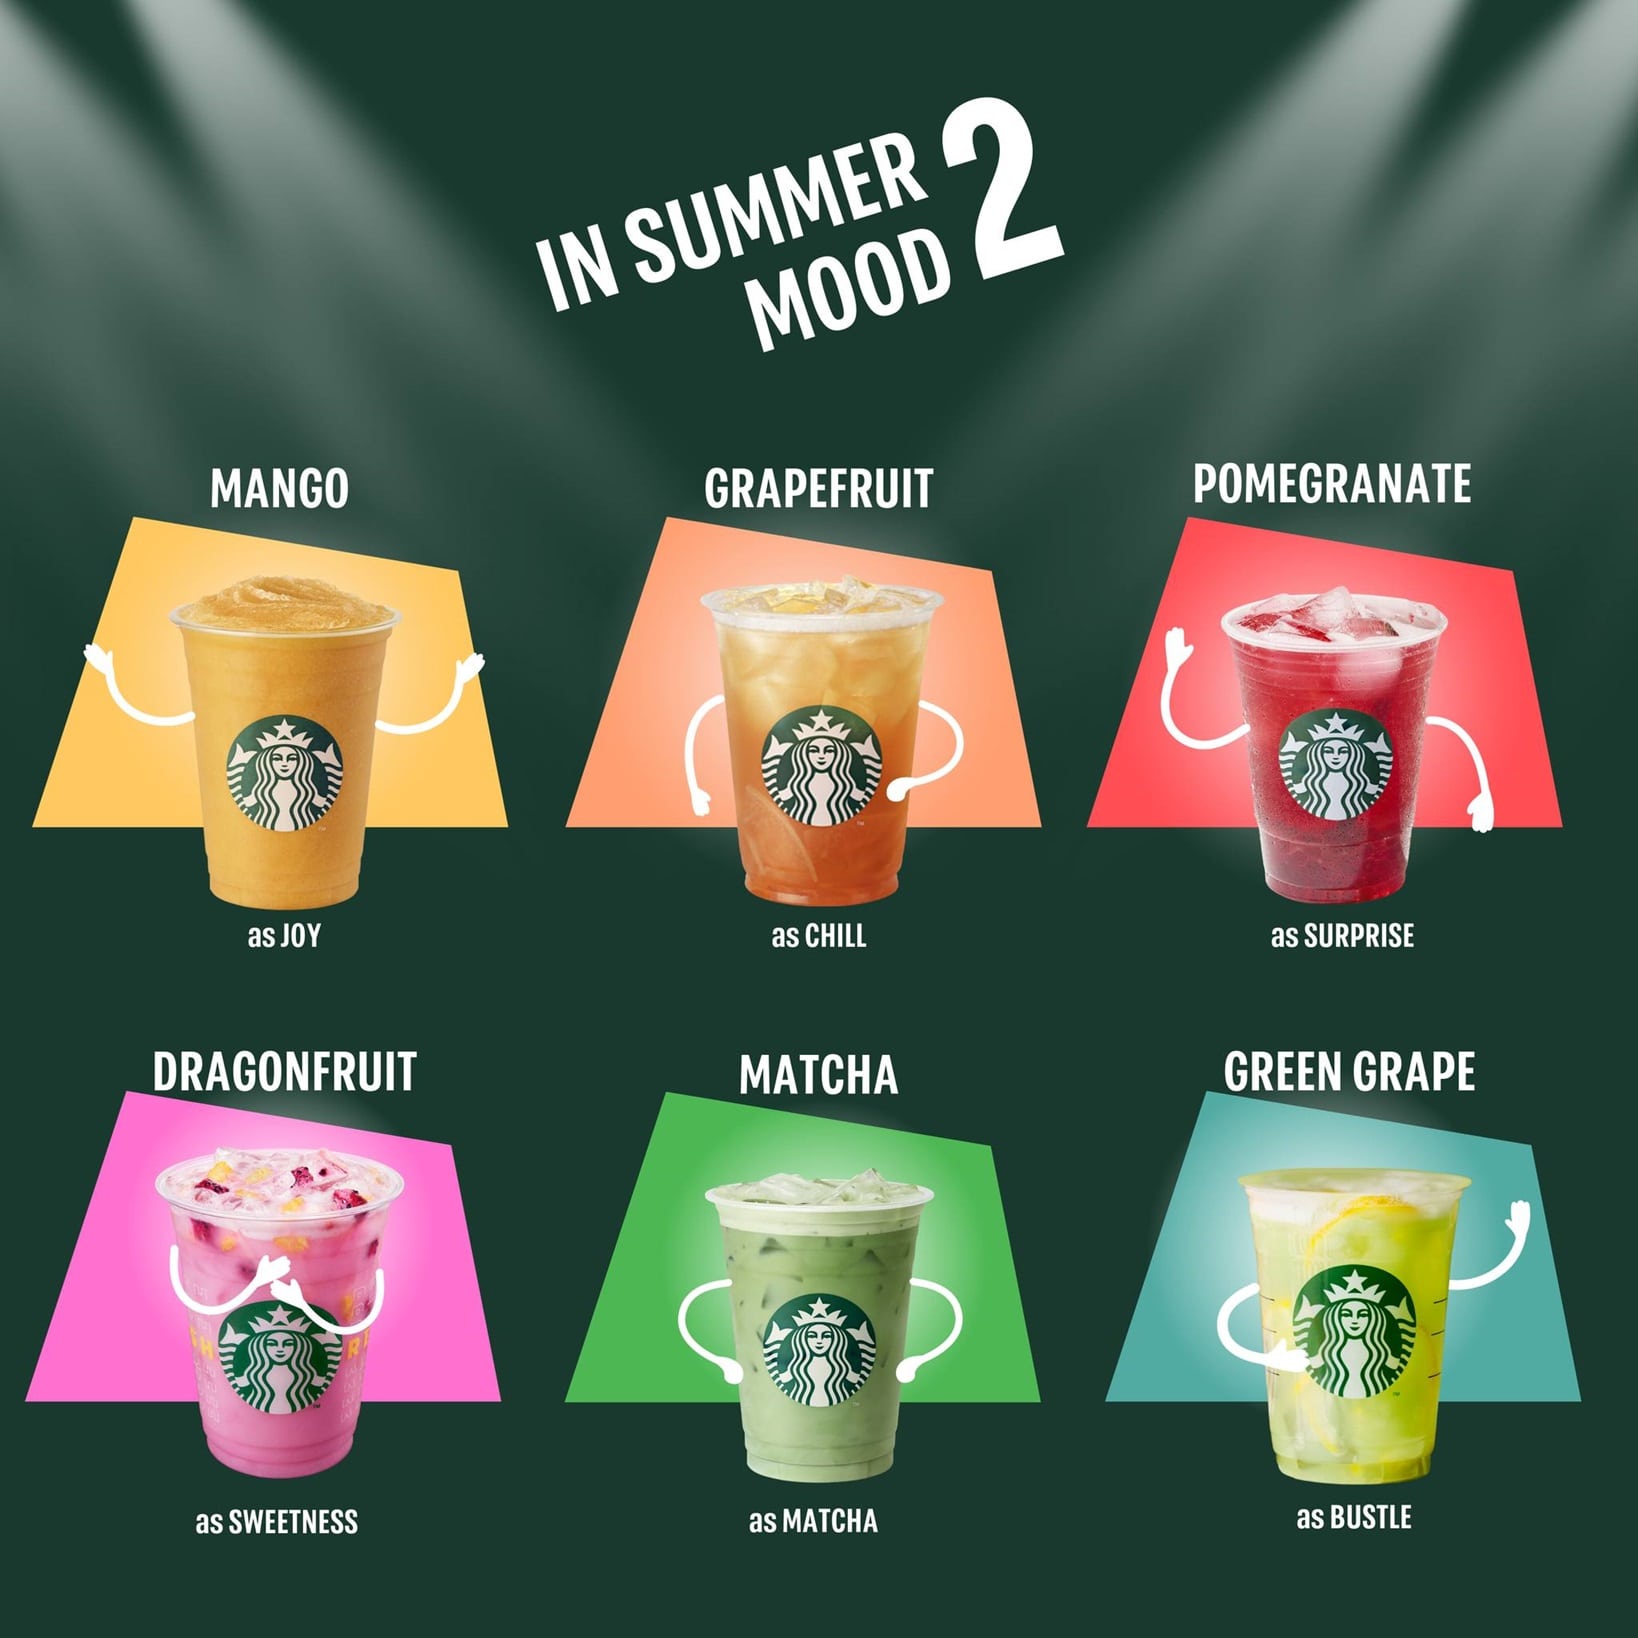 WHAT IS YOUR "SUMMER MOOD" NOW?